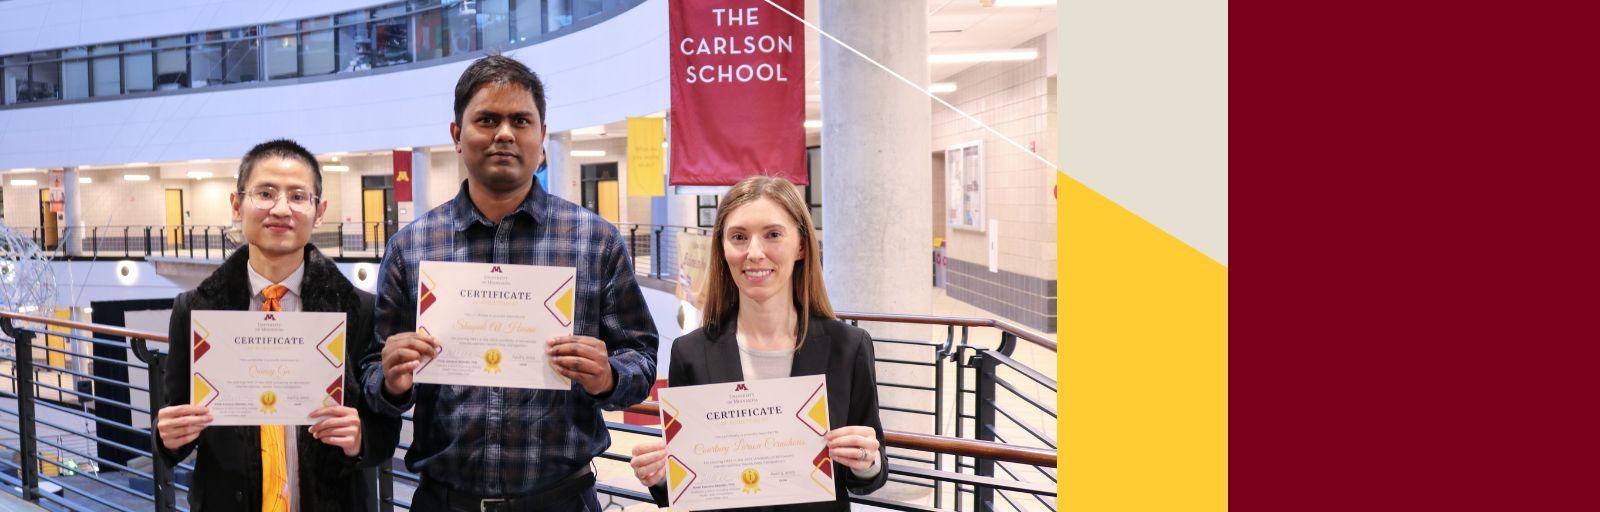 Quincy Gu, Shaquib Al Hasan, and Courtney Larson Cernohous hold their first-place certificates after winning the Interdisciplinary Health Data Competition.